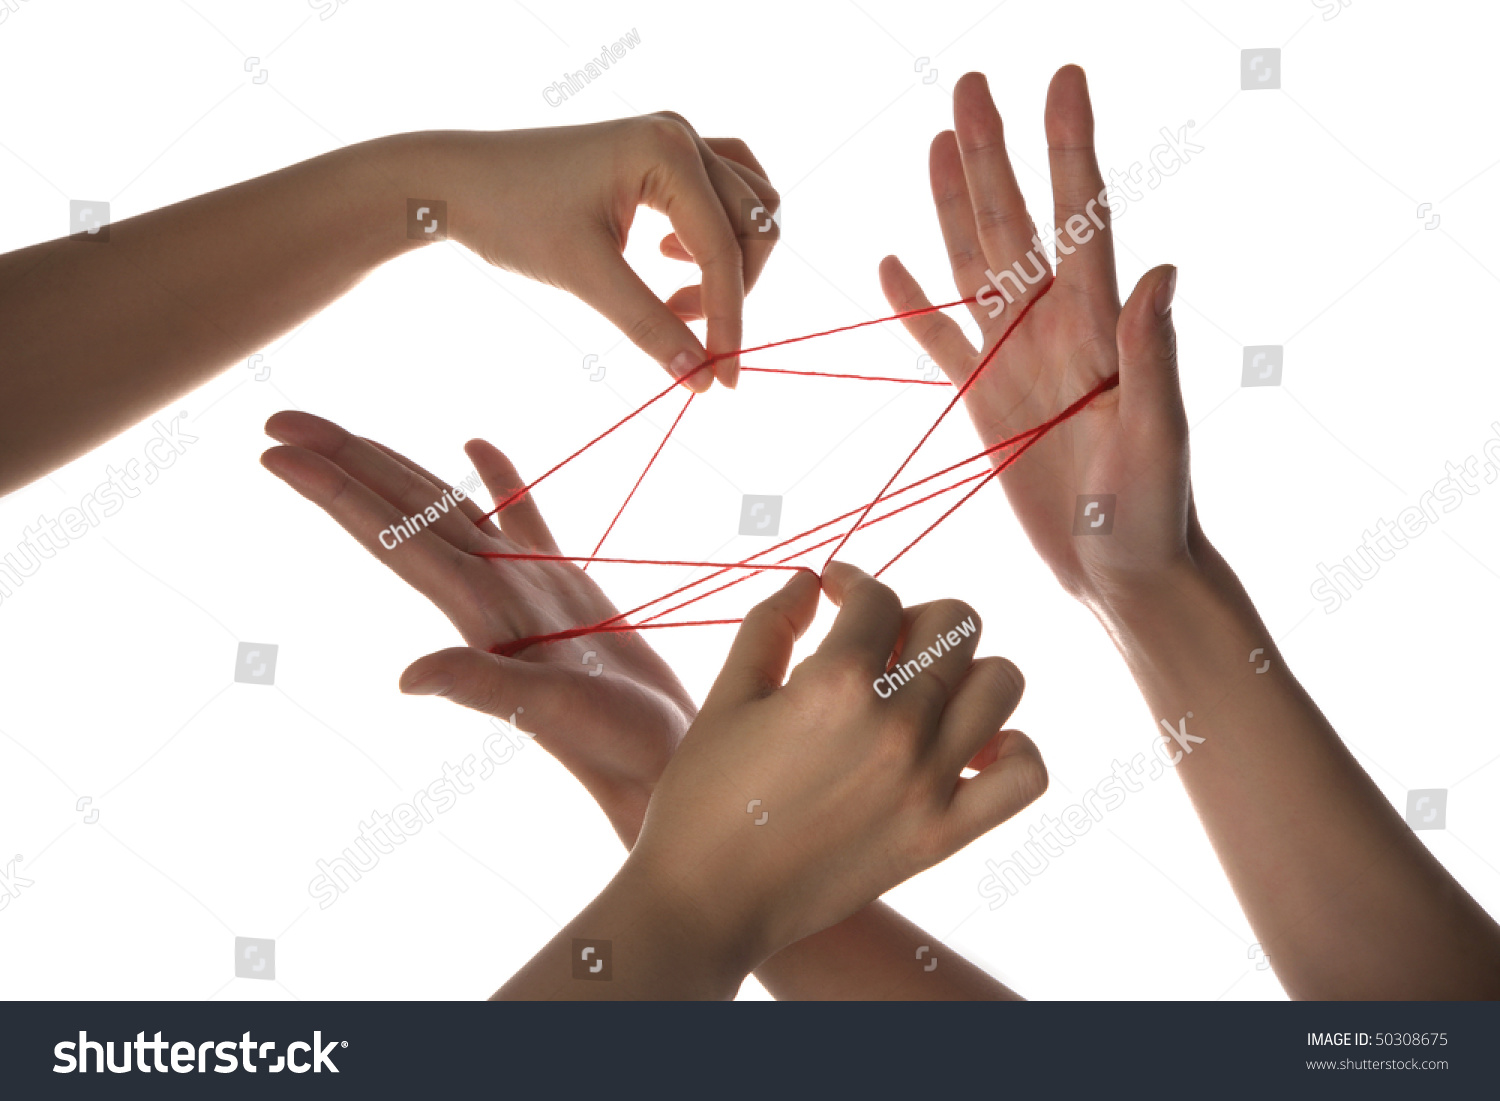 People Playing Cats Cradle Gamecloseup Stock Photo Edit Now 50308675